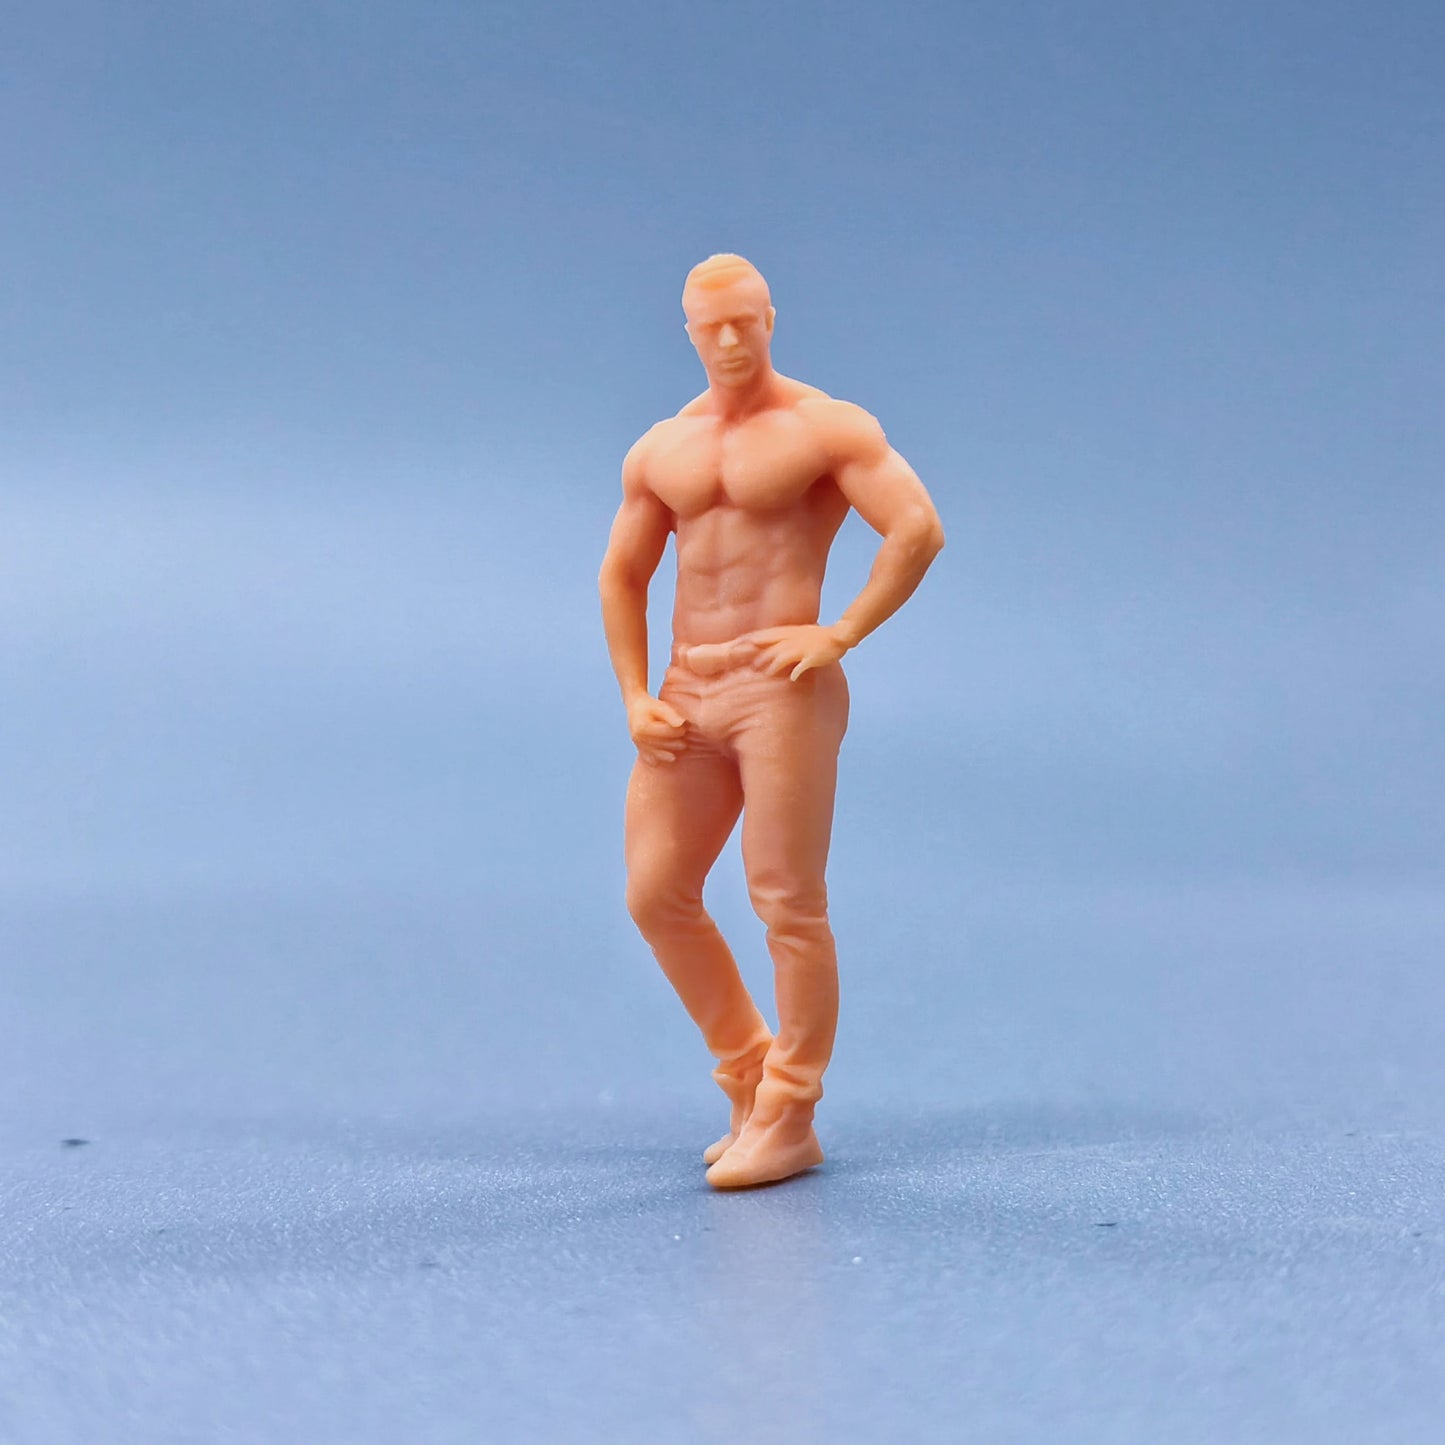 1/64 1/43 Figurines Scale Model Resin Fitness Men Uncolored Miniatures Diorama Hand-painted L305